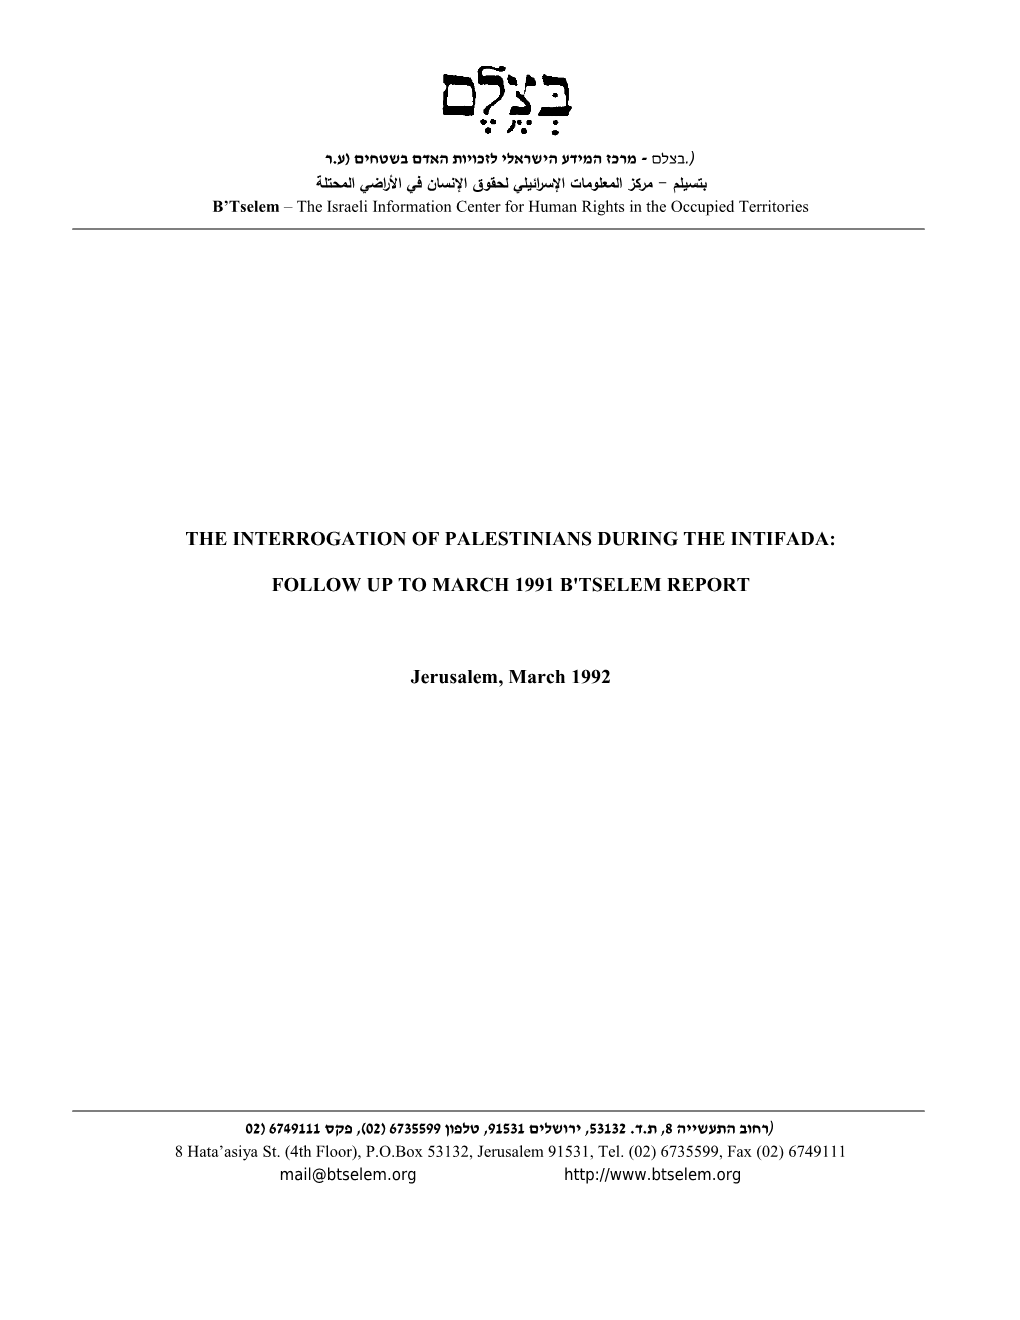 B'tselem Report: the Interrogation of Palestinians During the Intifada:Follow up to March